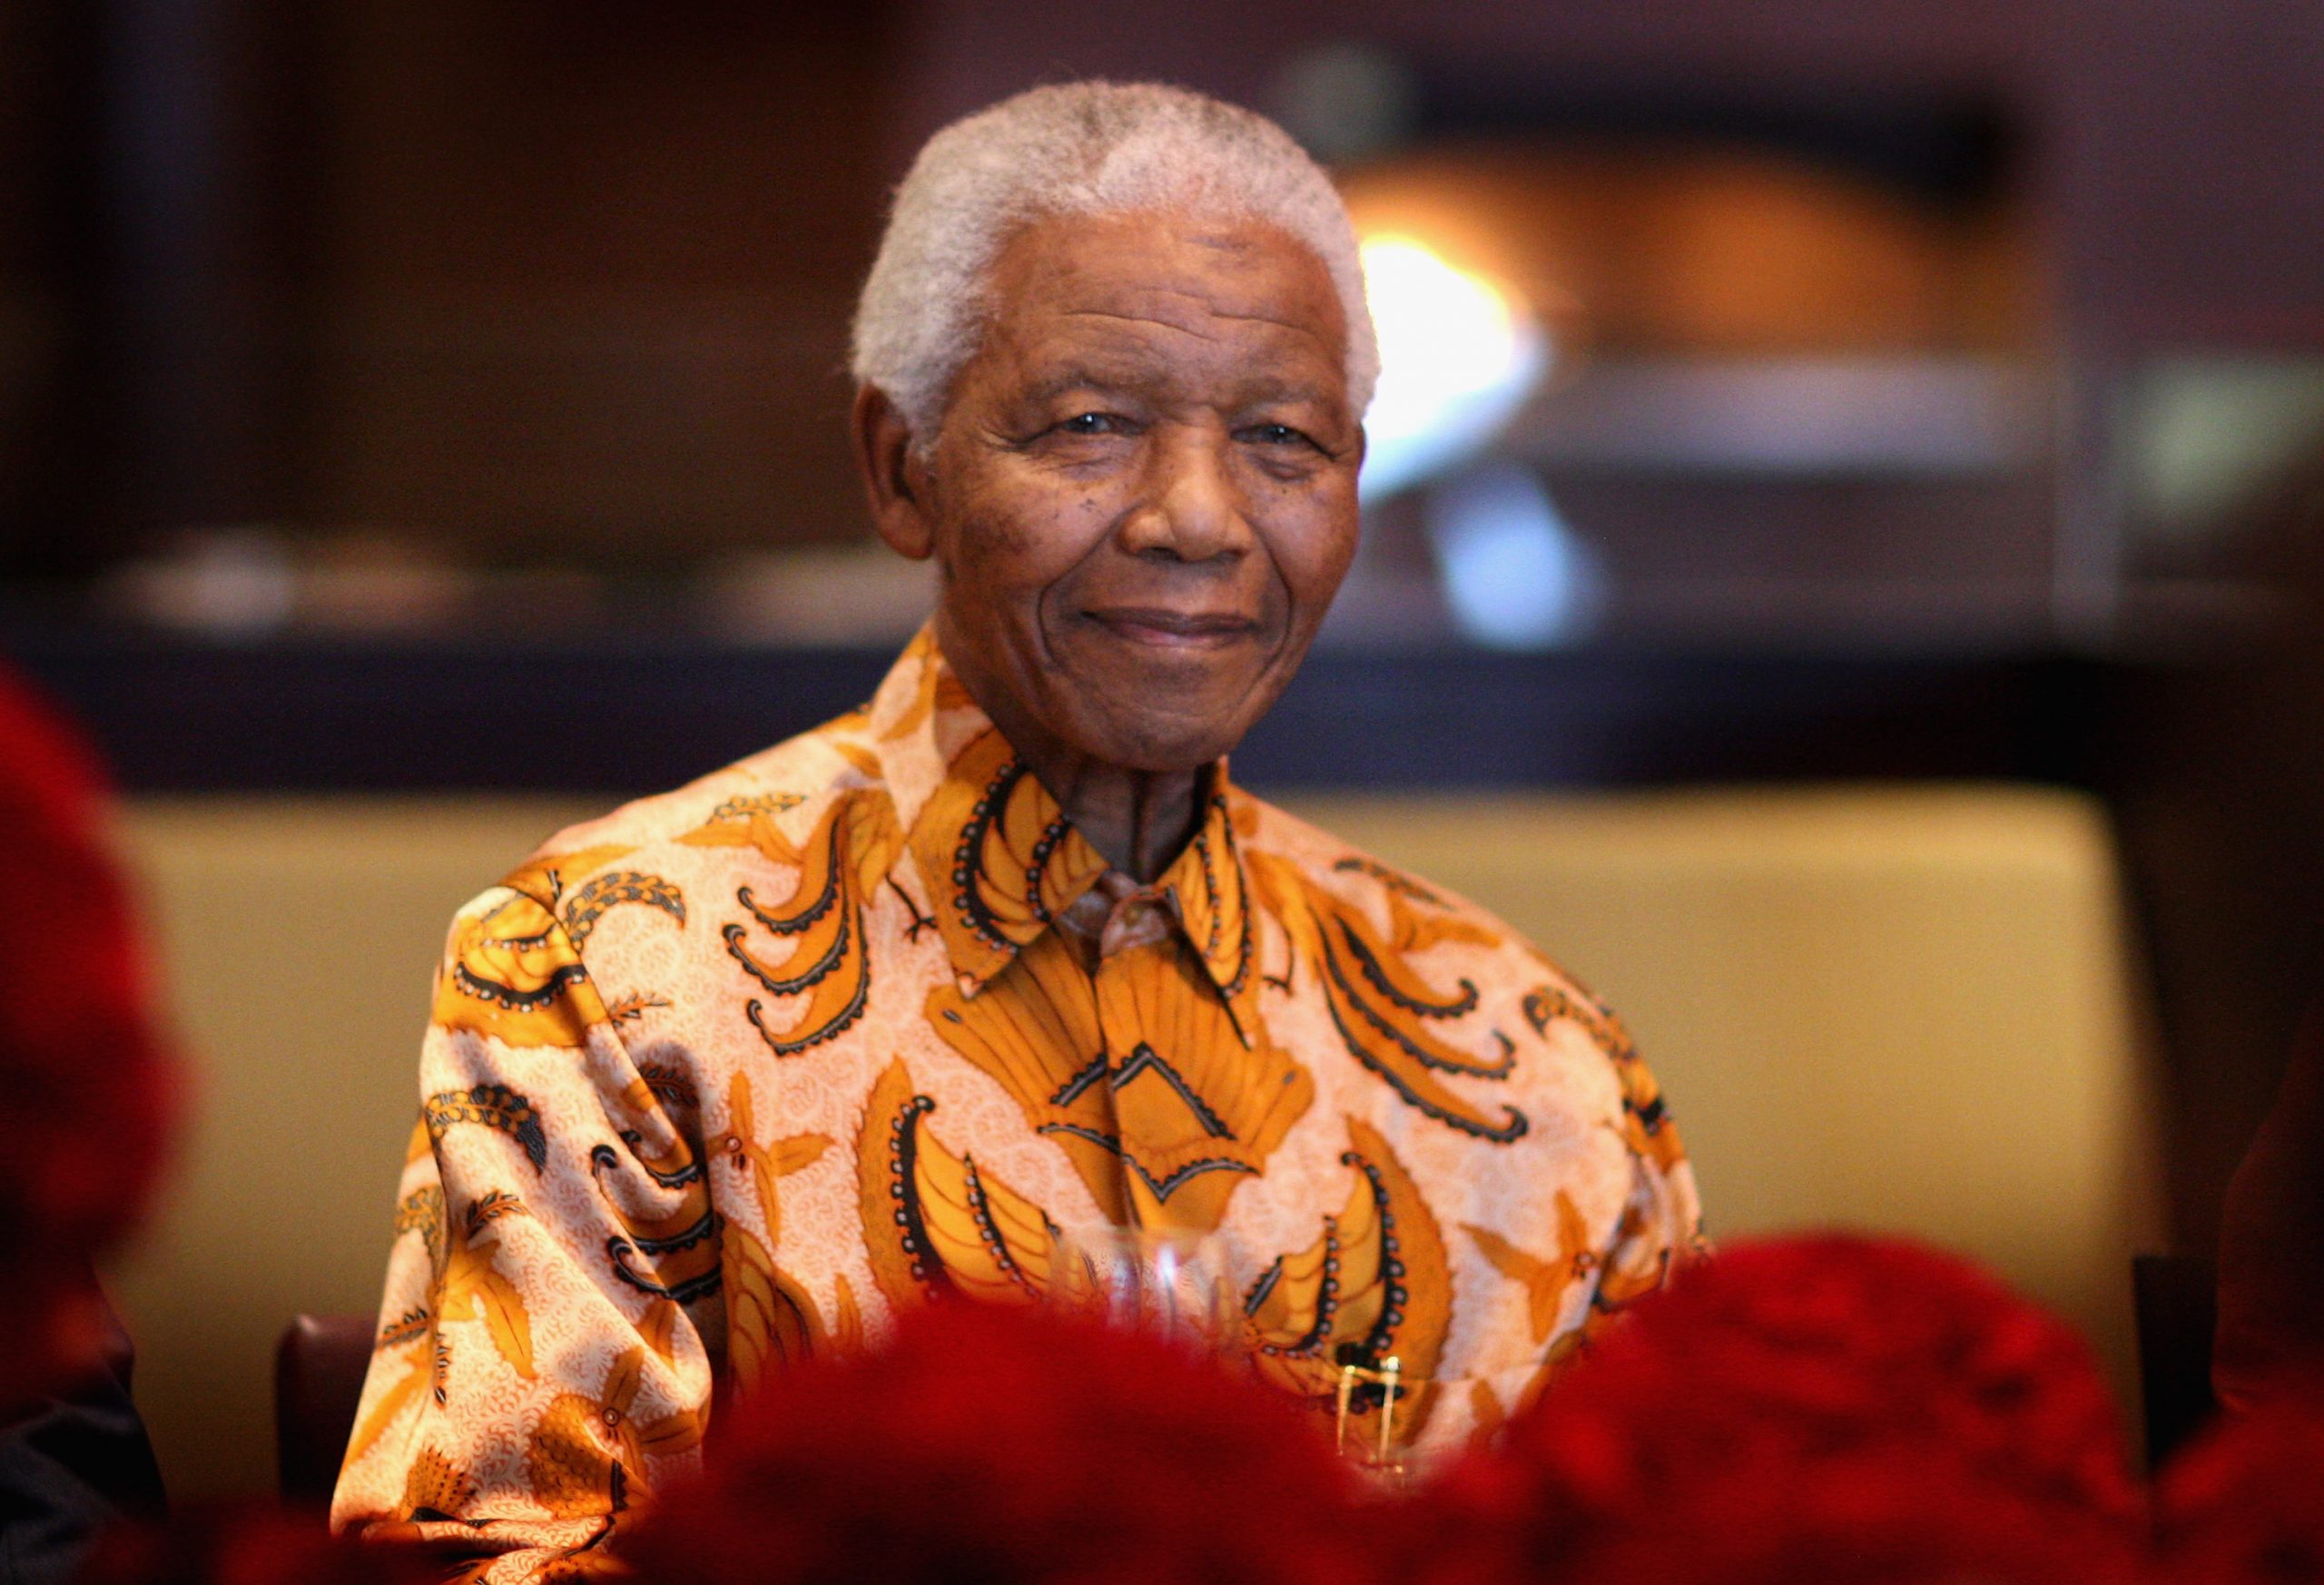 Nelson Mandela's famous shirts, belongings up for auction